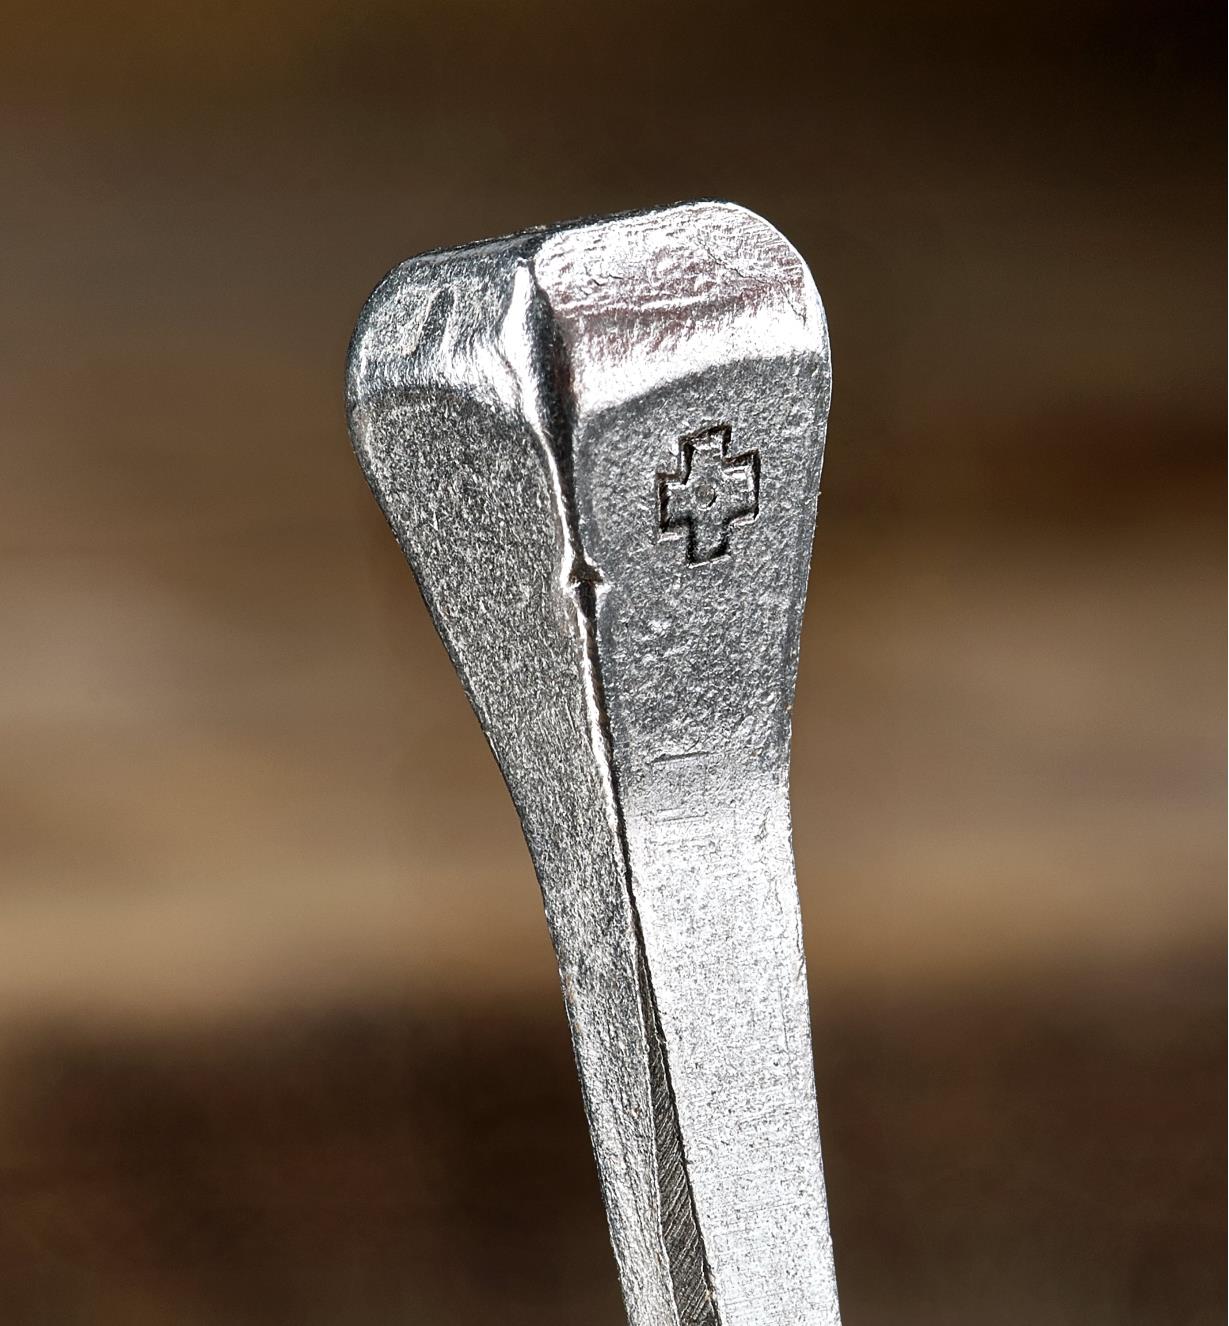 A close view of the Swiss cross embossed on the side of a #9 horseshoe nail